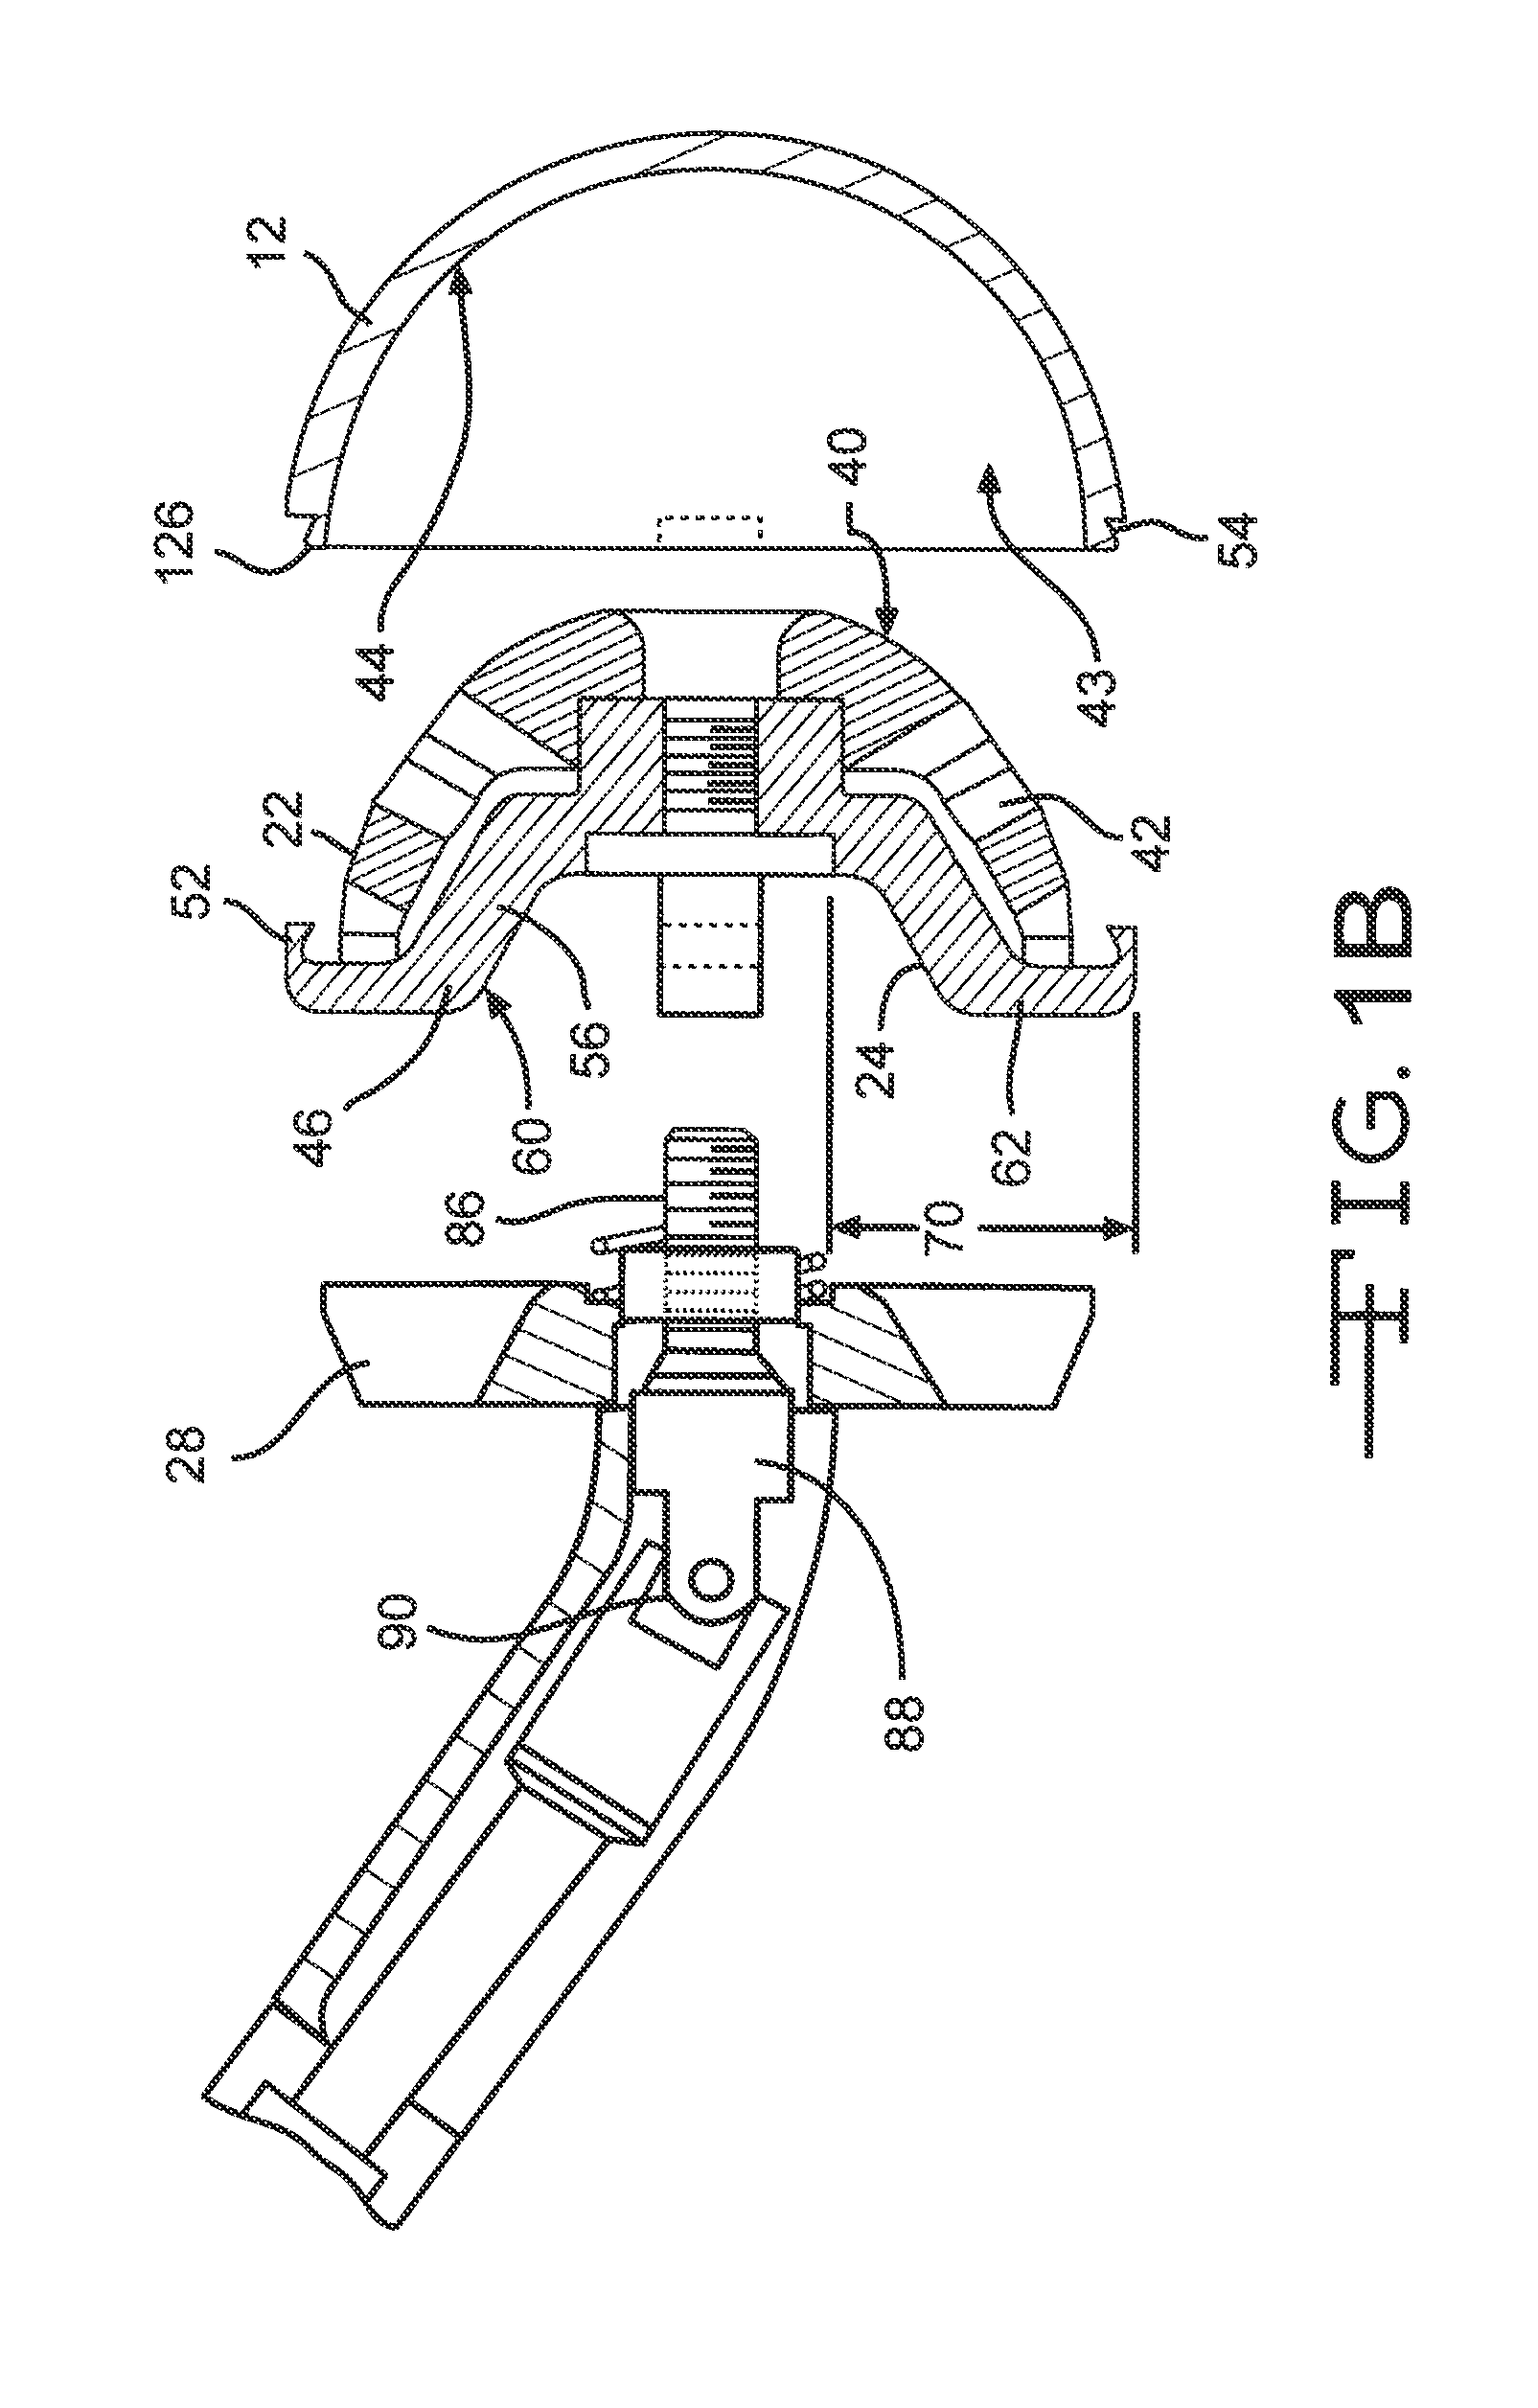 Offset Cup Impactor With a Grasping Plate for Double Mobility Implants